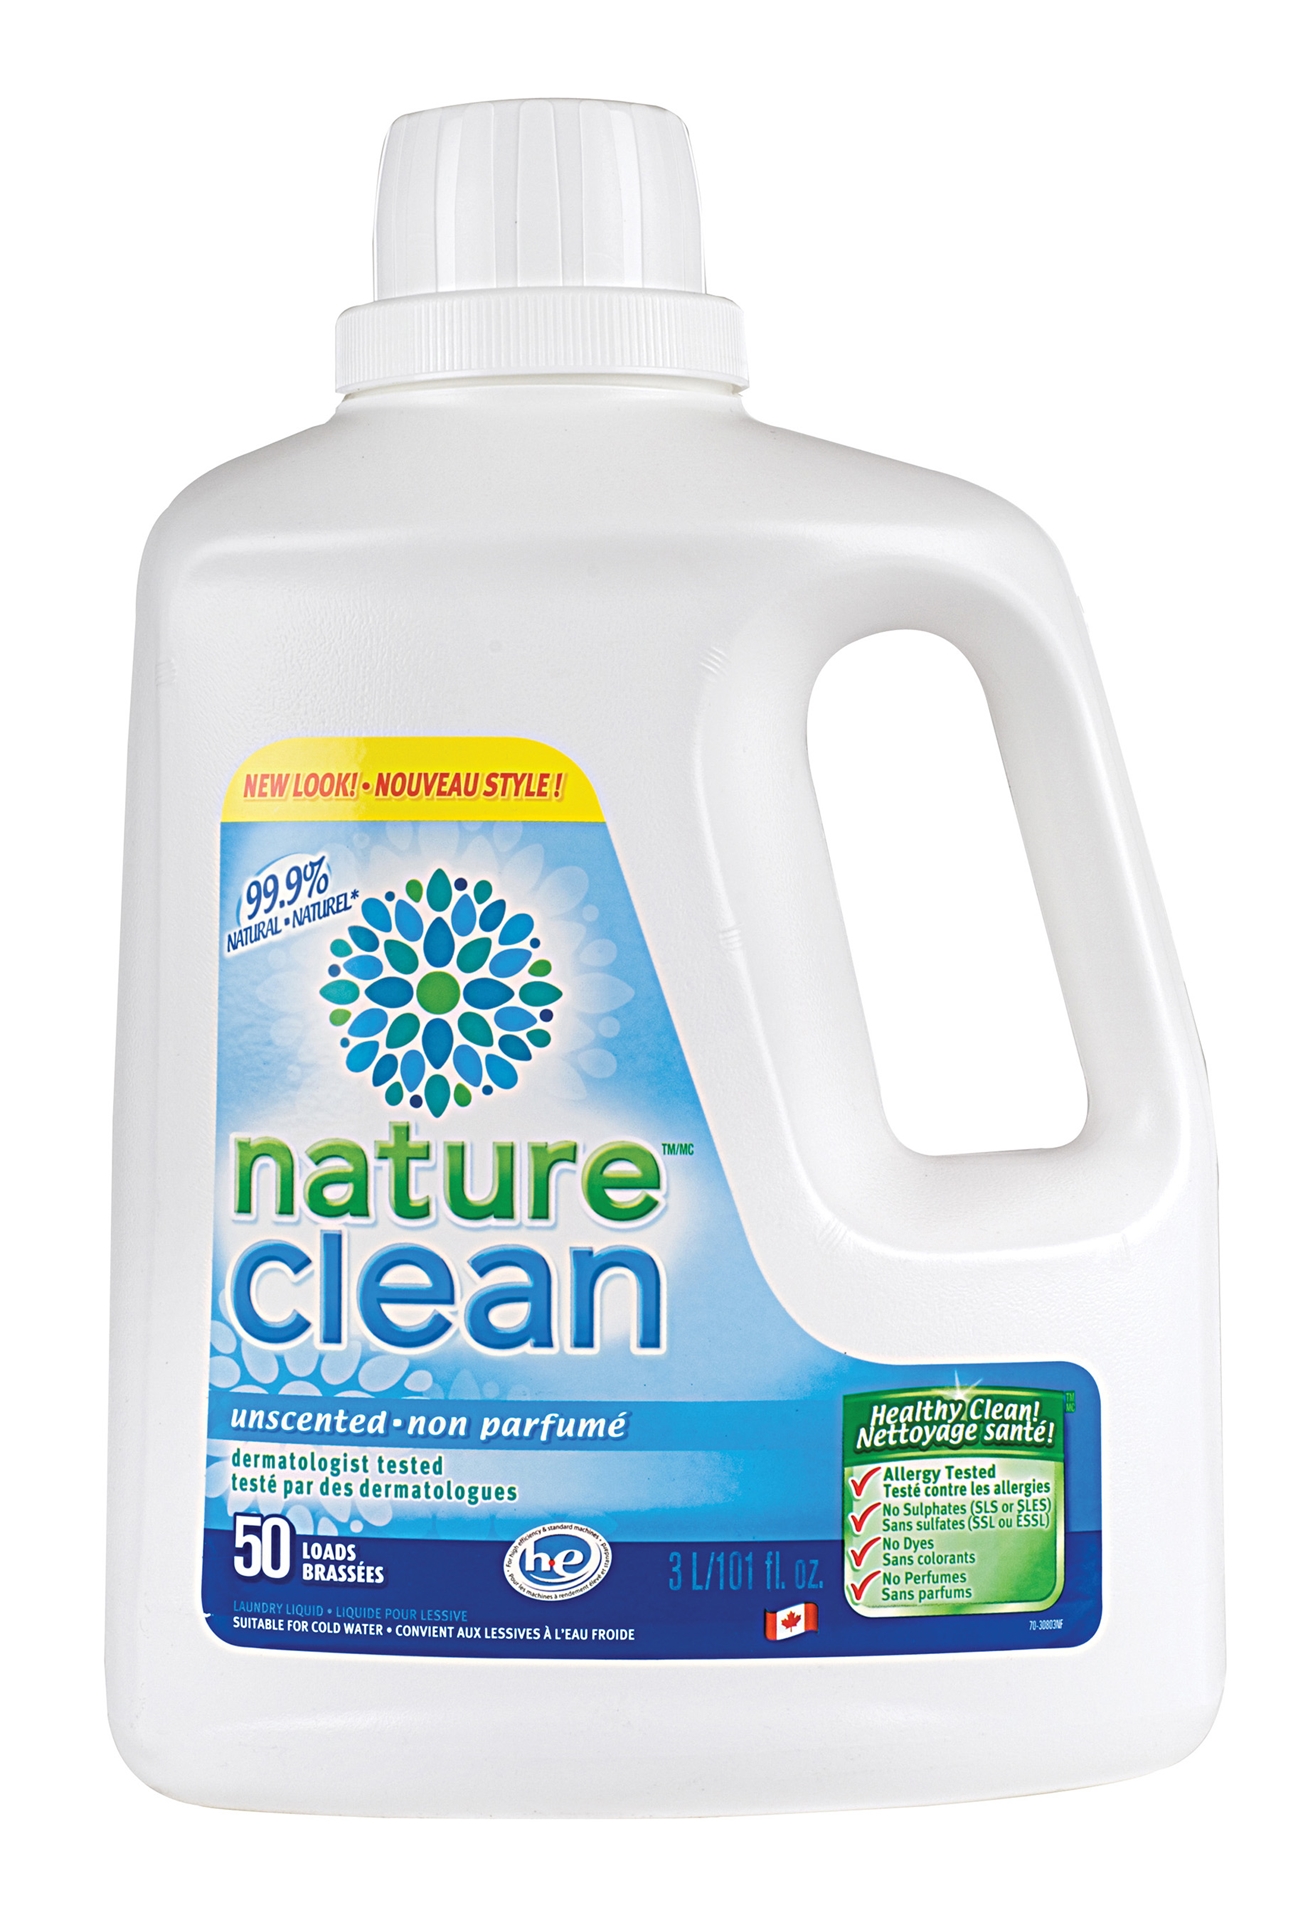 Natural cleaning